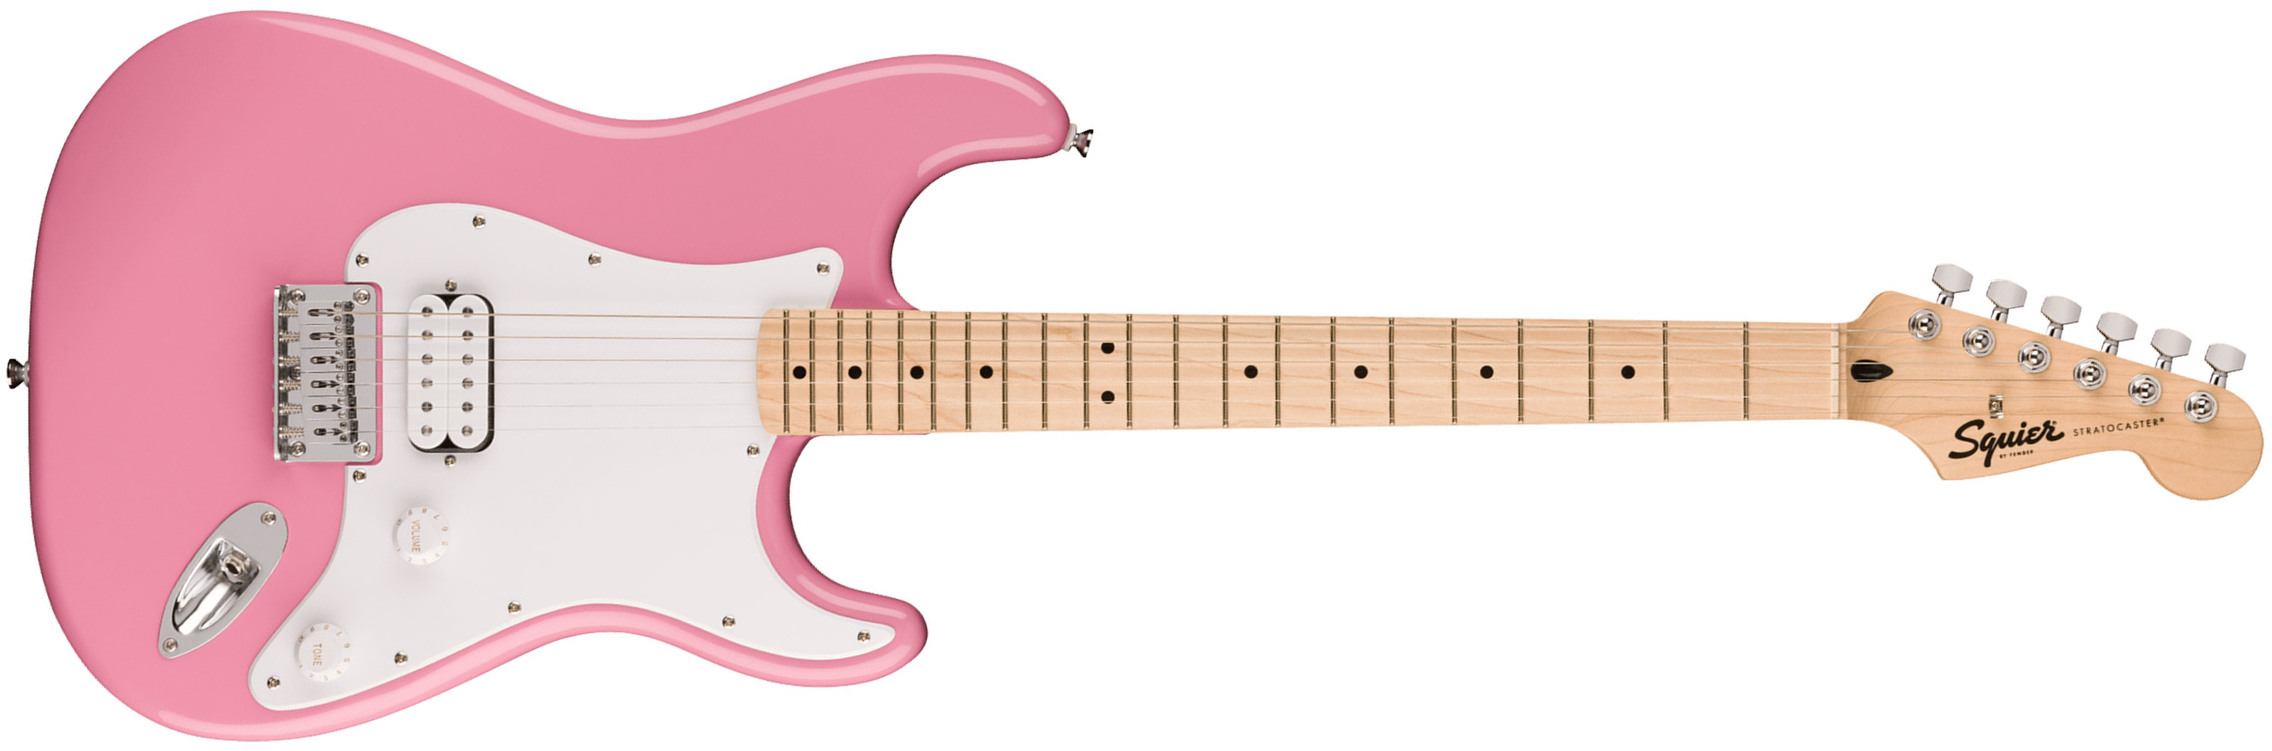 Squier Strat Sonic Hardtail H Ht Mn - Flash Pink - Str shape electric guitar - Main picture